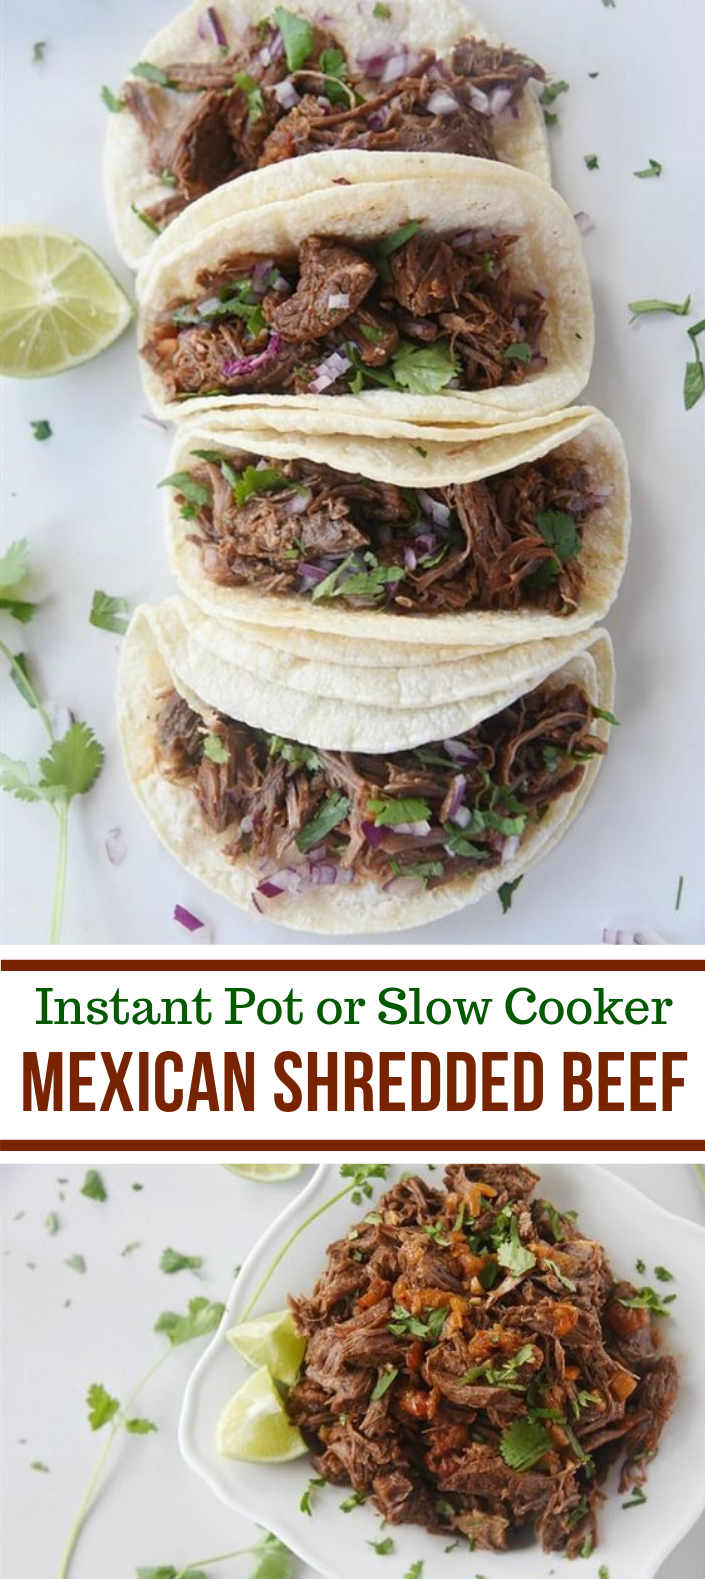 Mexican Shredded Beef {Instant Pot or Slow Cooker} #dinner #crockpot